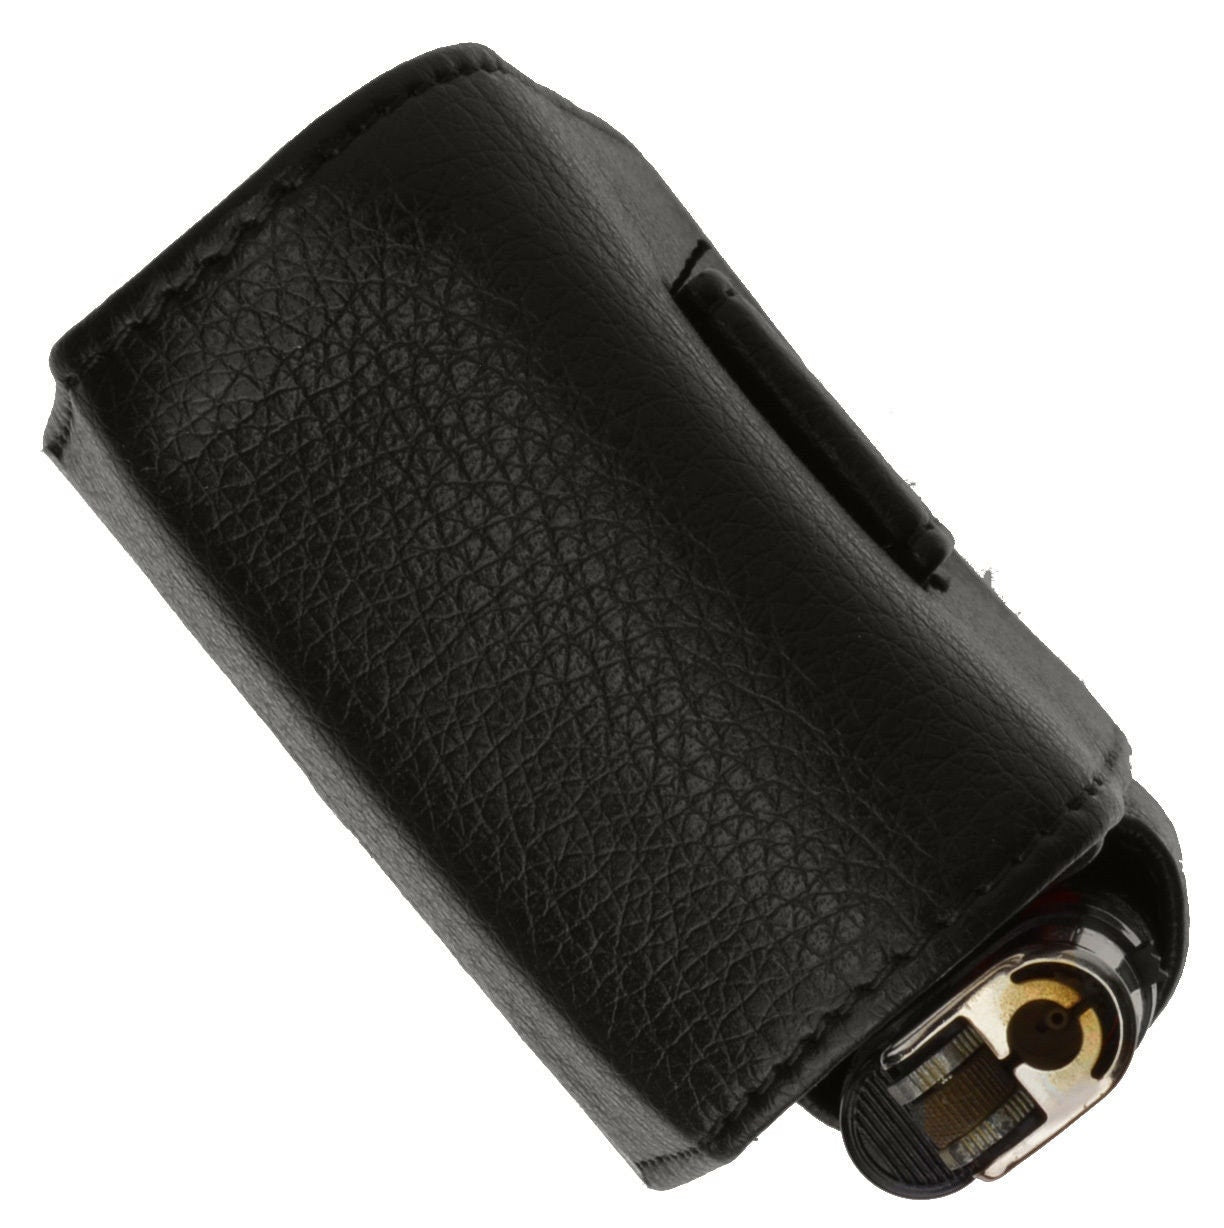 Croc Print Genuine Leather Cigarette Pack Holder Flip-Top Pouch Smoke Carrying Hard Case Croco Cowboy Style